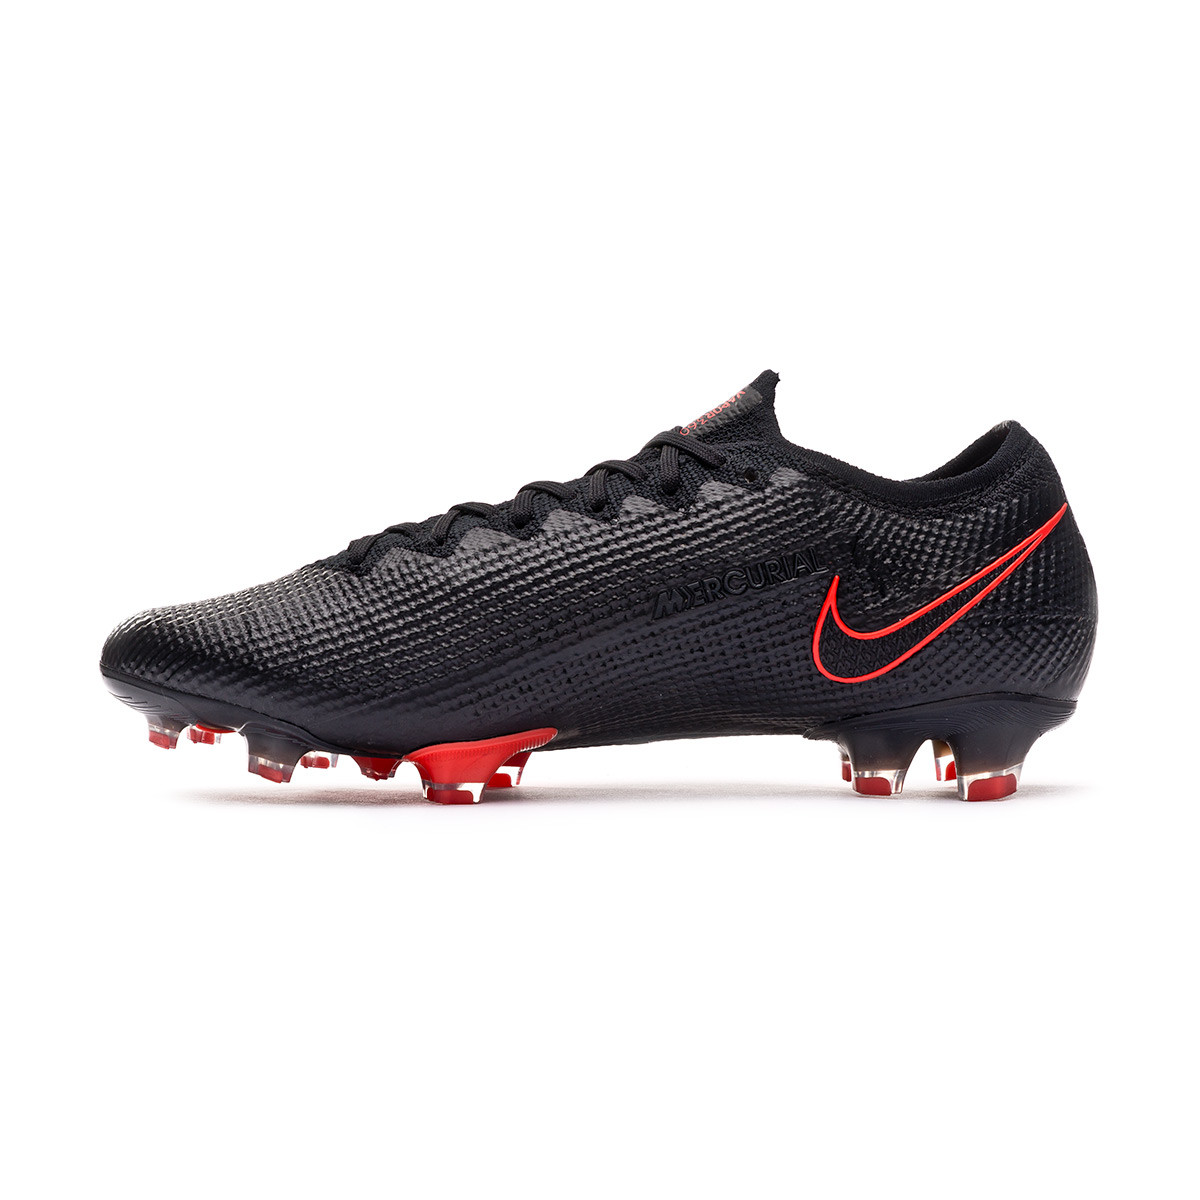 nike football boots red and black